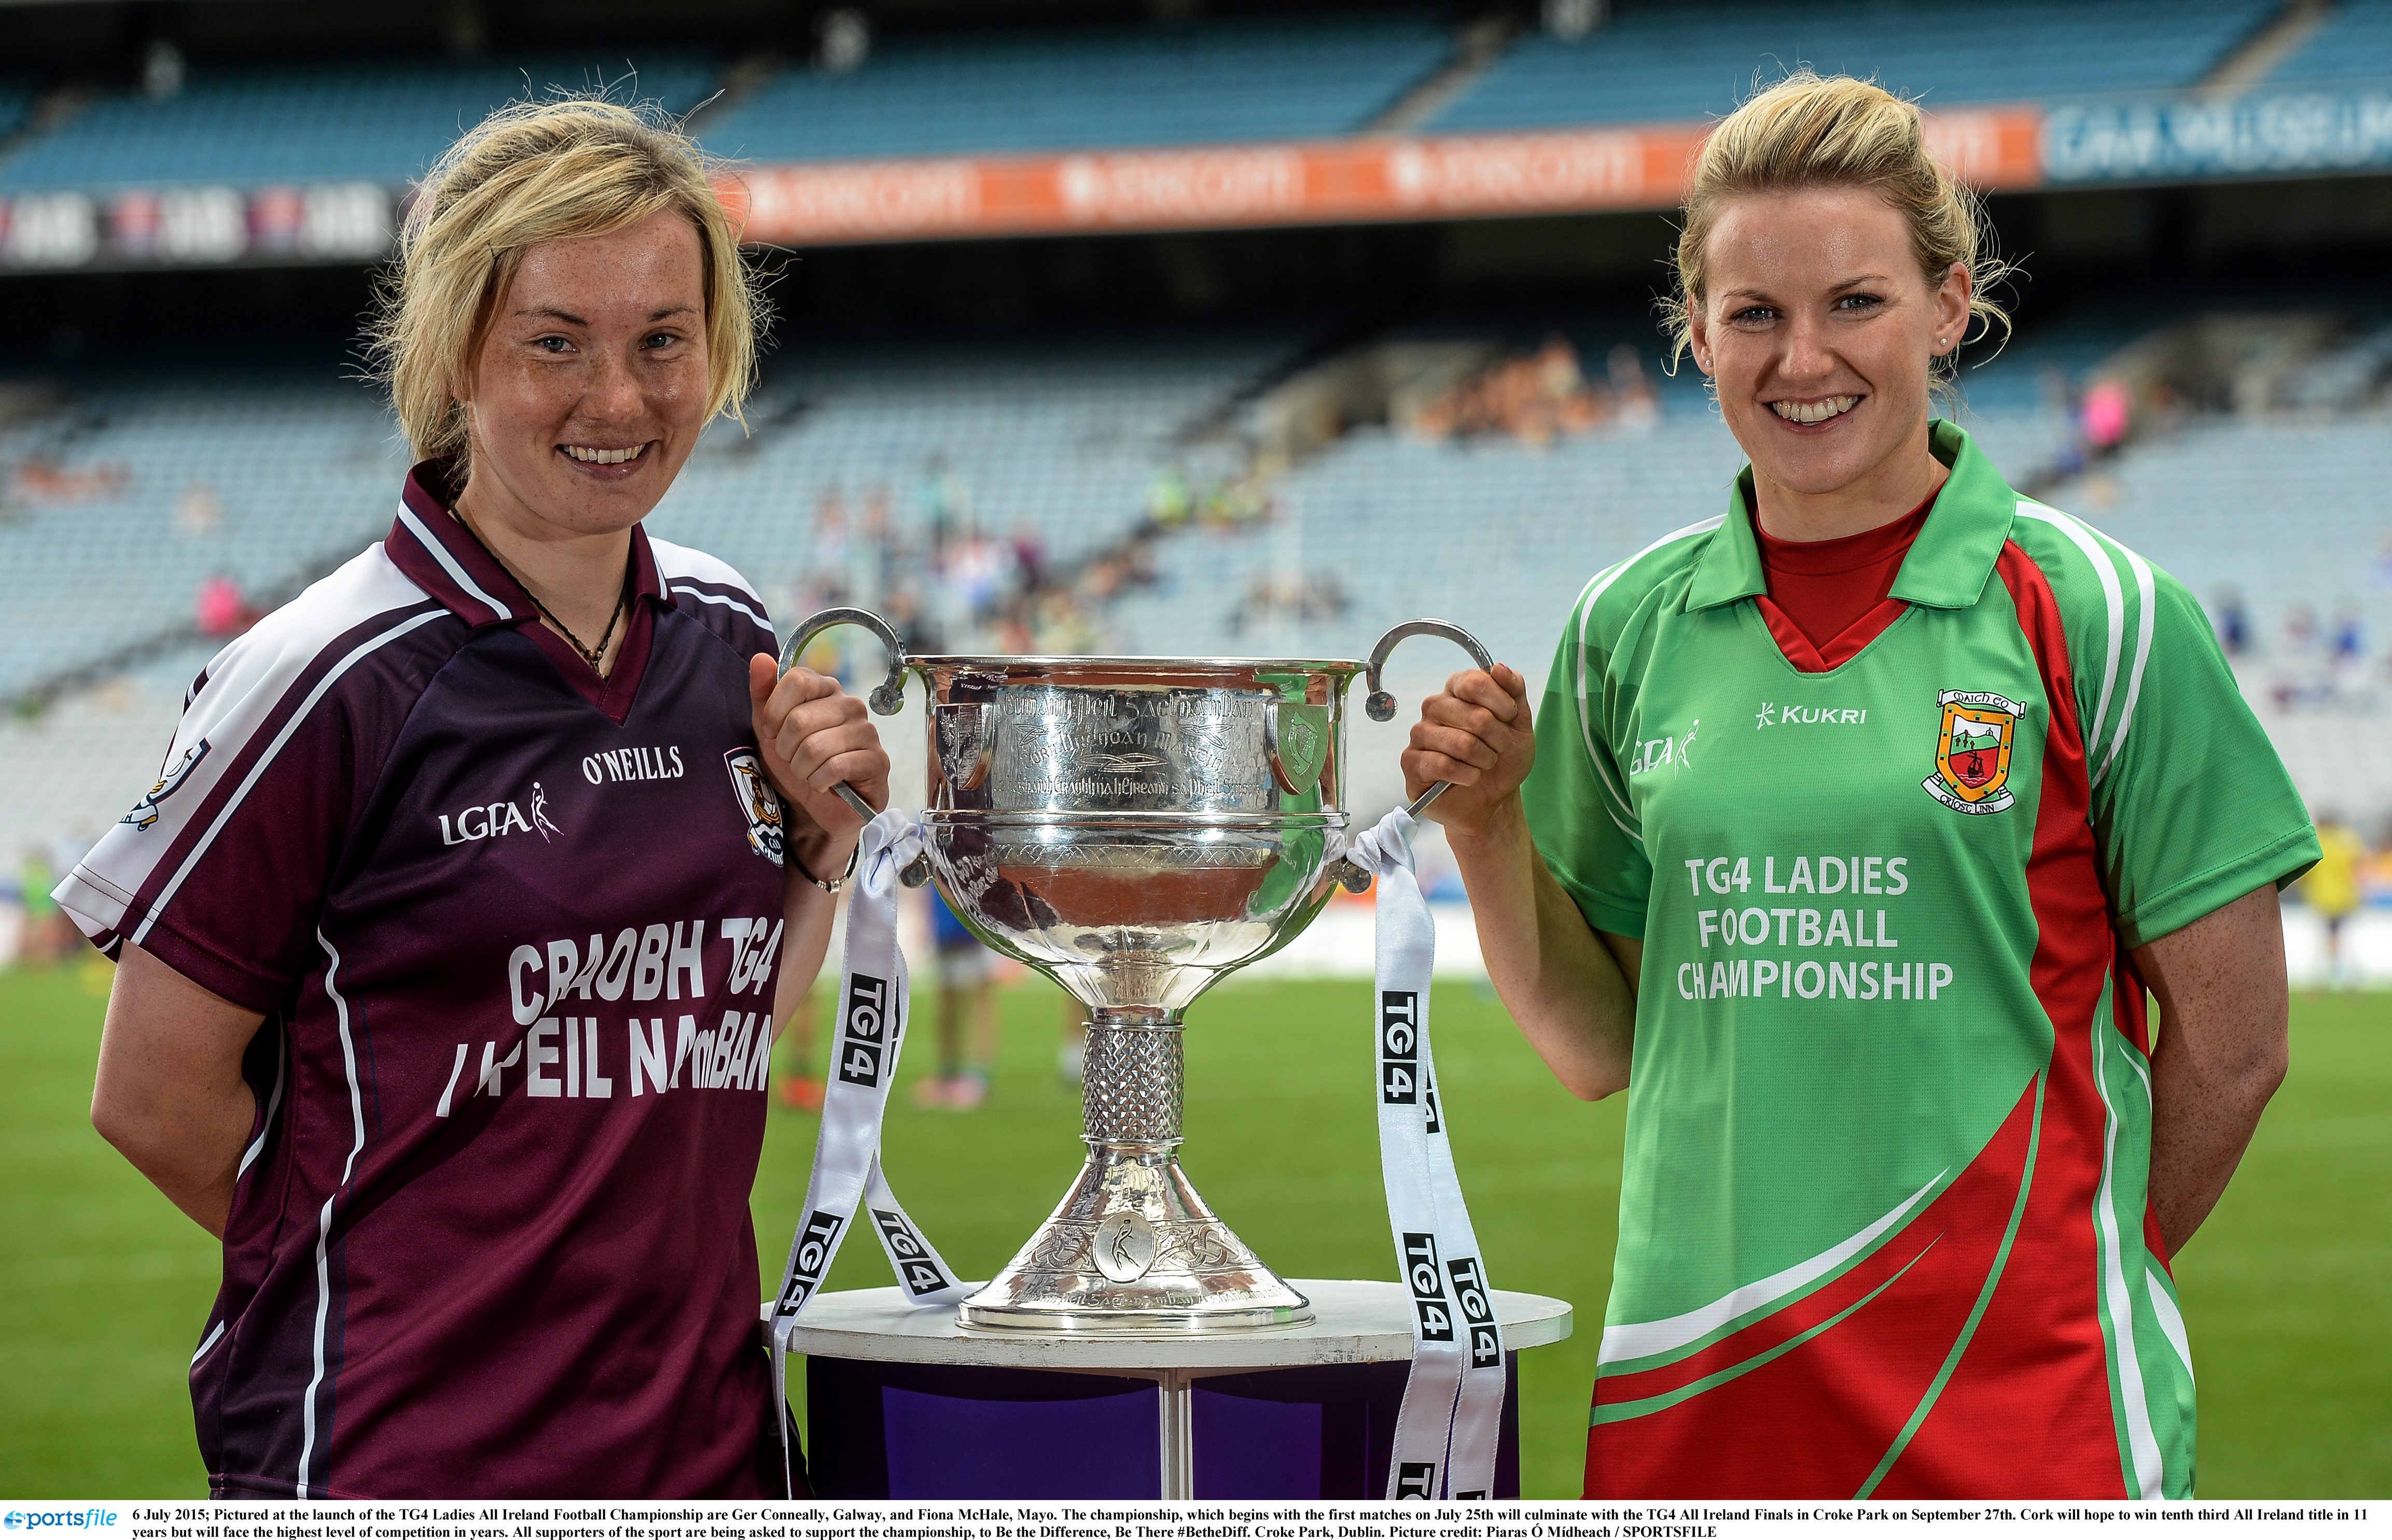 6 July 2015; Pictured at the launch of the TG4 Ladies All Ireland Football Championship are Tracey Leonard, Galway, and Fiona McHale, Mayo. The championship, which begins with the first matches on July 25th will culminate with the TG4 All Ireland Finals in Croke Park on September 27th. Cork will hope to win tenth third All Ireland title in 11 years but will face the highest level of competition in years. All supporters of the sport are being asked to support the championship, to Be the Difference, Be There #BetheDiff. Croke Park, Dublin. Picture credit: Piaras Ó Mídheach / SPORTSFILE